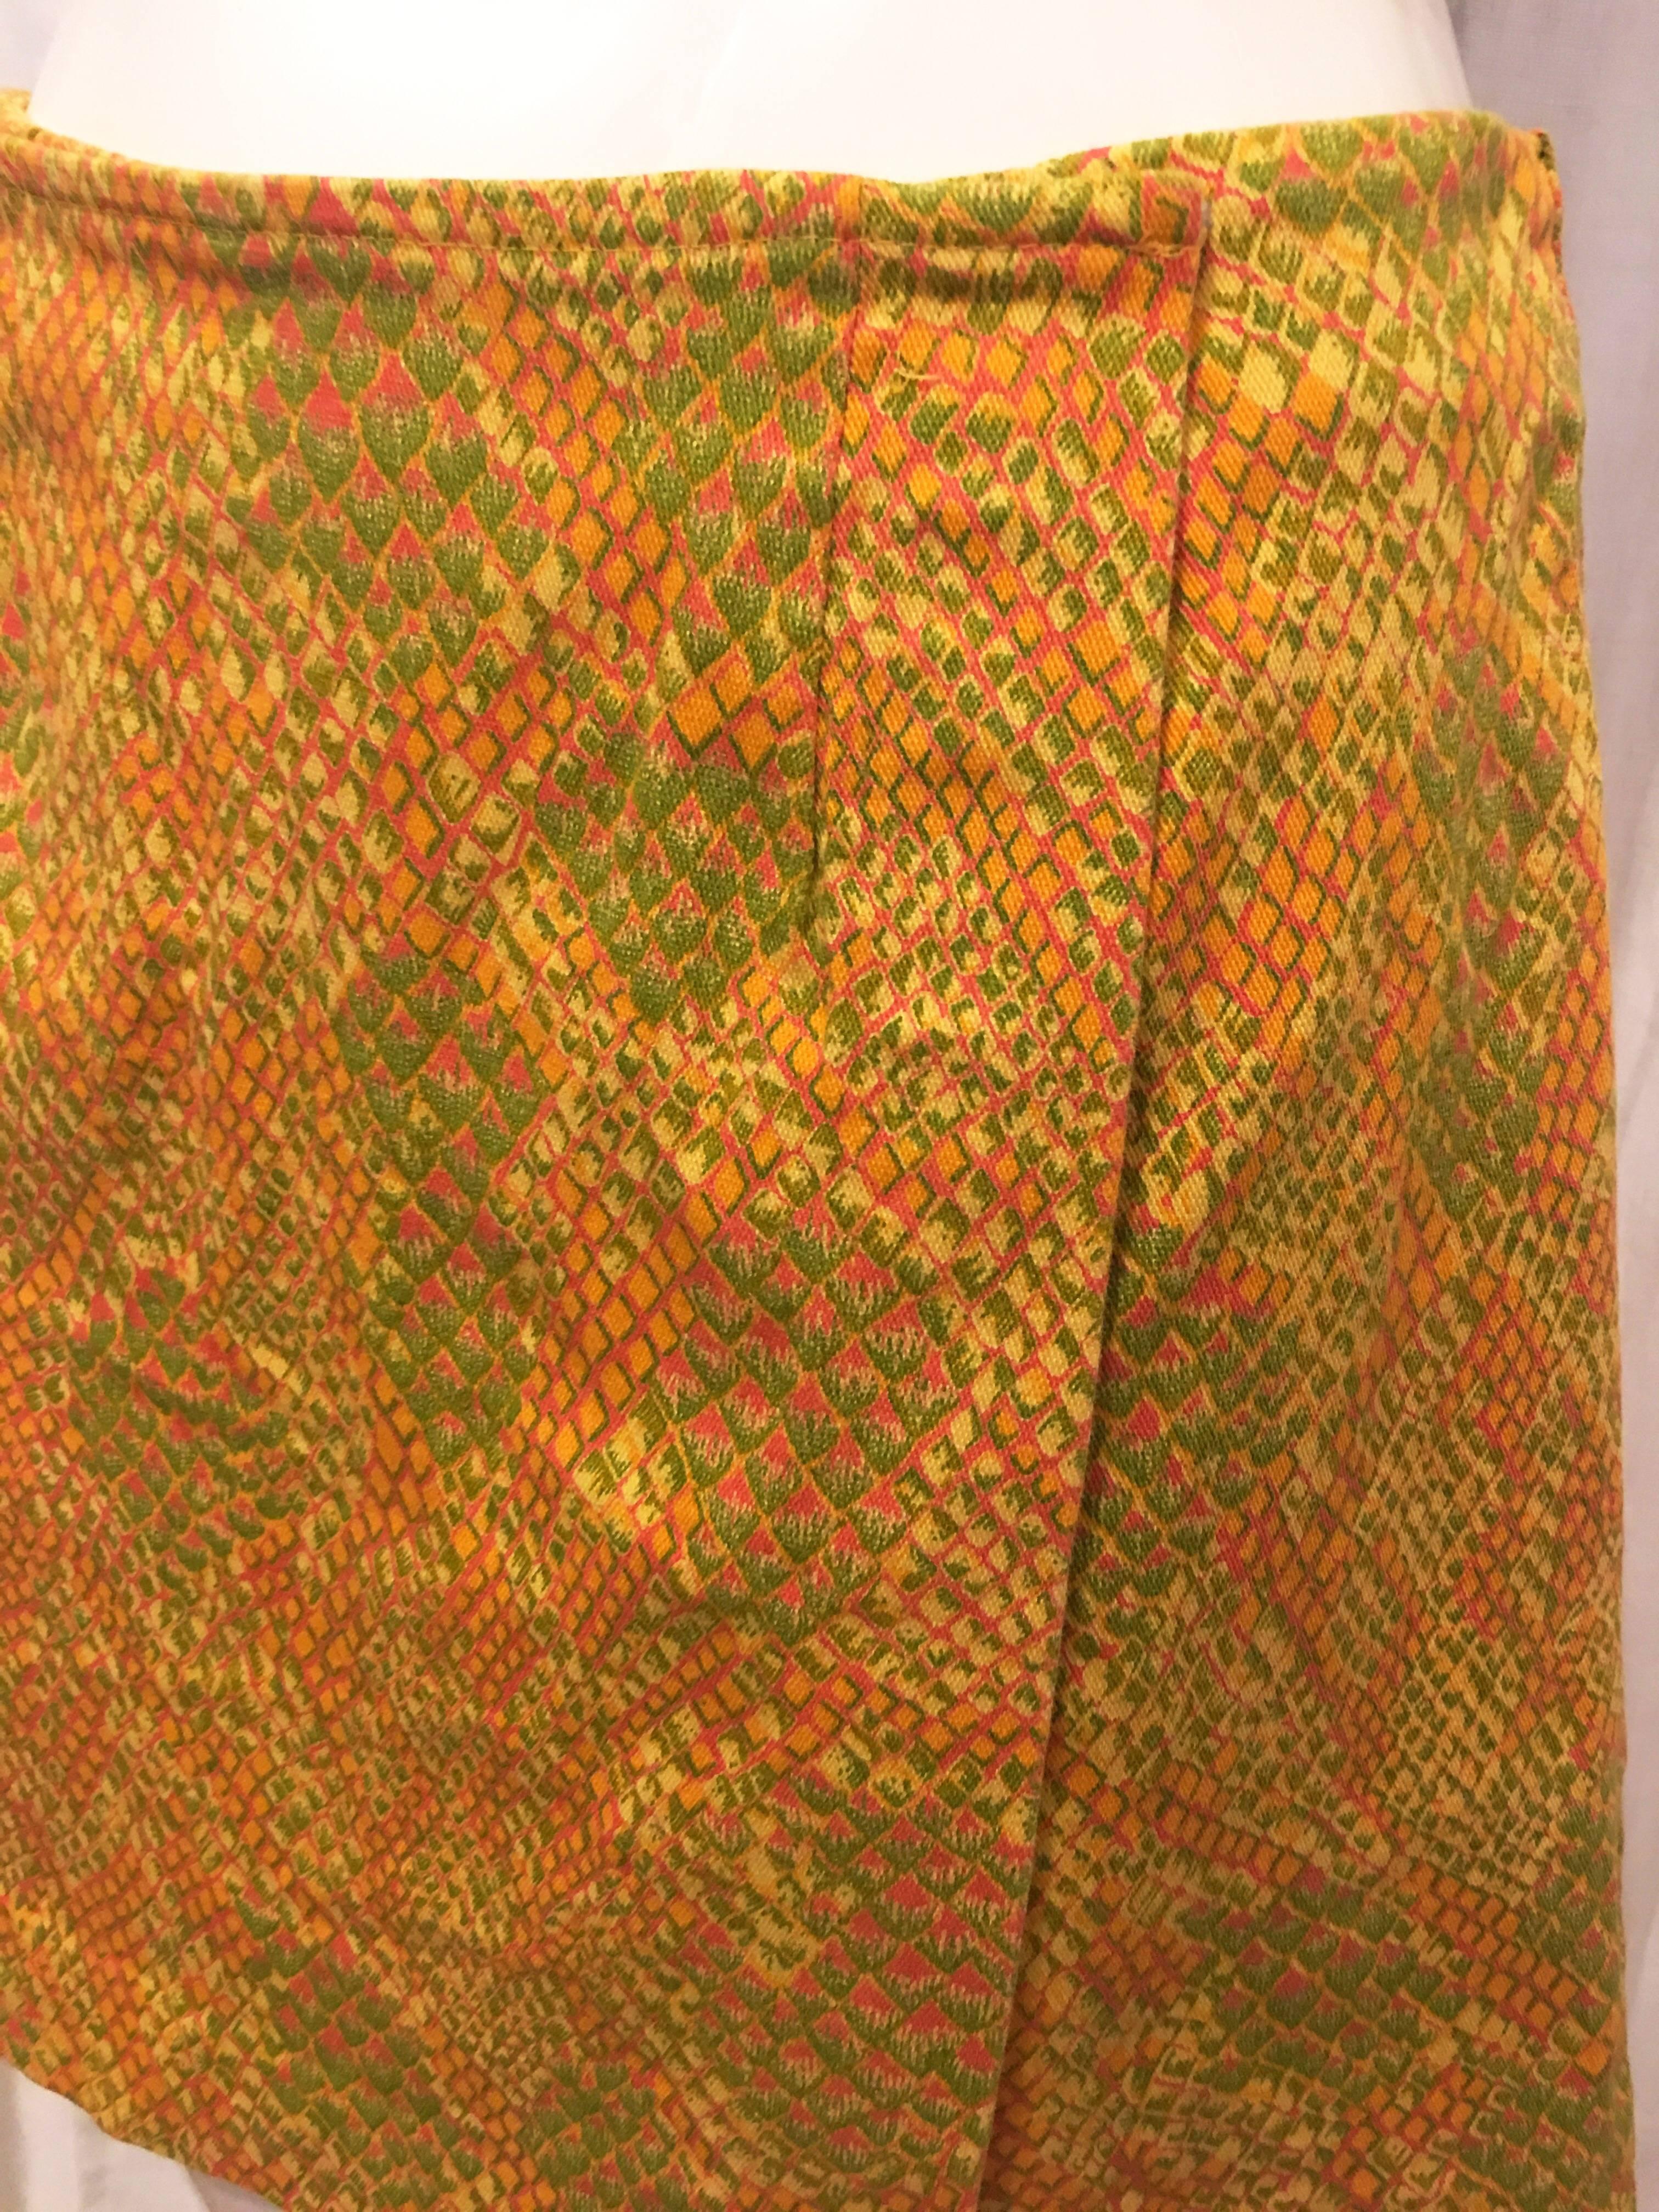 Snakeskin style print in red orange yellow and green. Snap button closure connects flap of skirt over front of shorts. Shorts also zip up back. Hit at about halfway down the thigh. 